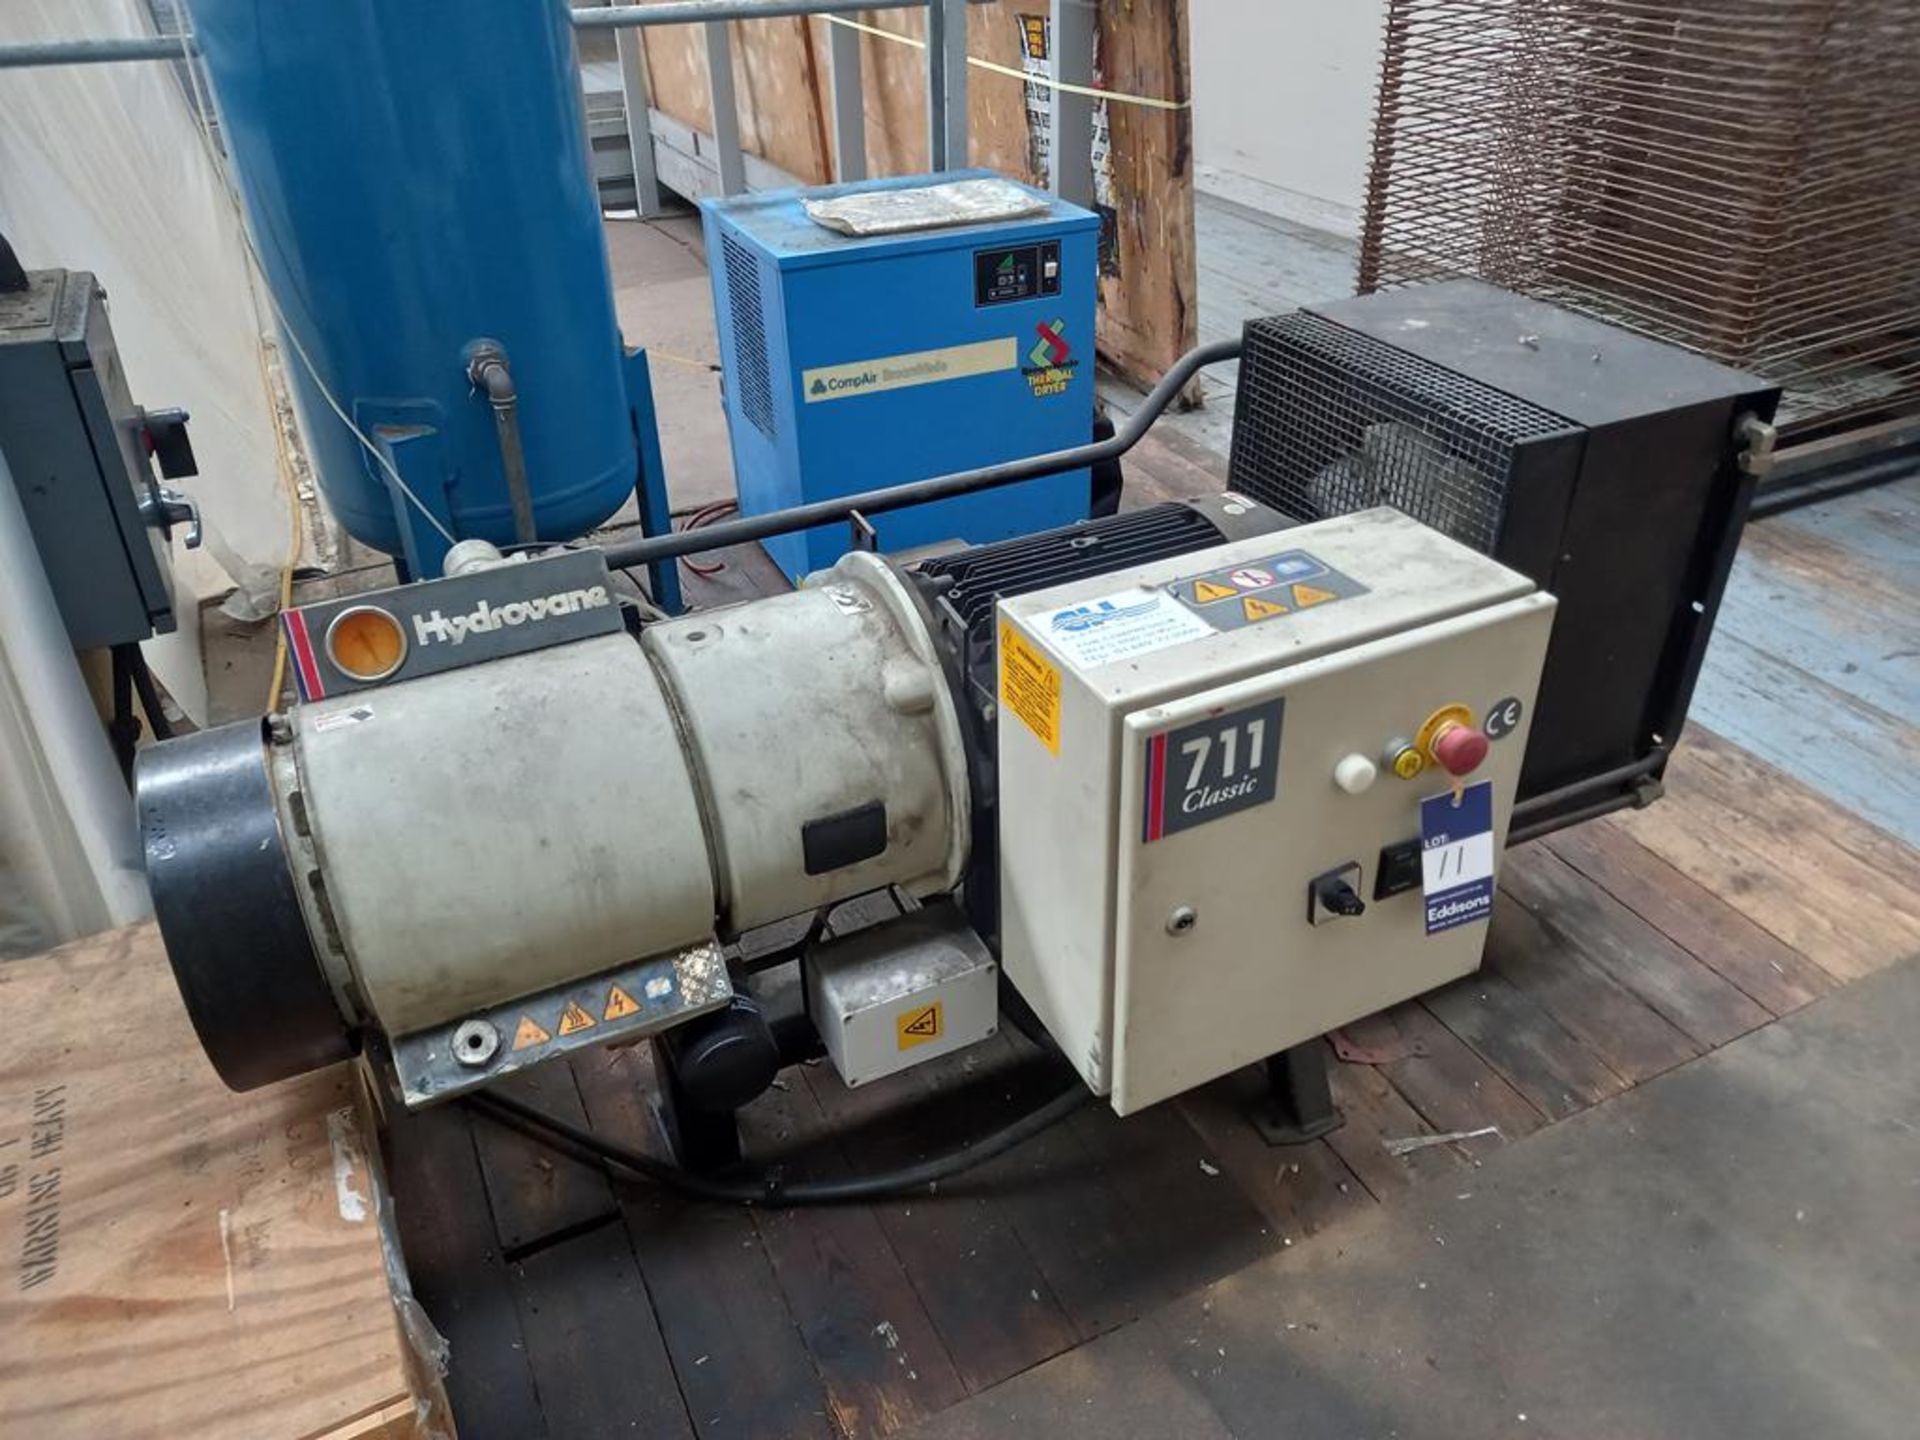 Hydrovane Compressor, Dryer and Air Receiver - Image 2 of 4